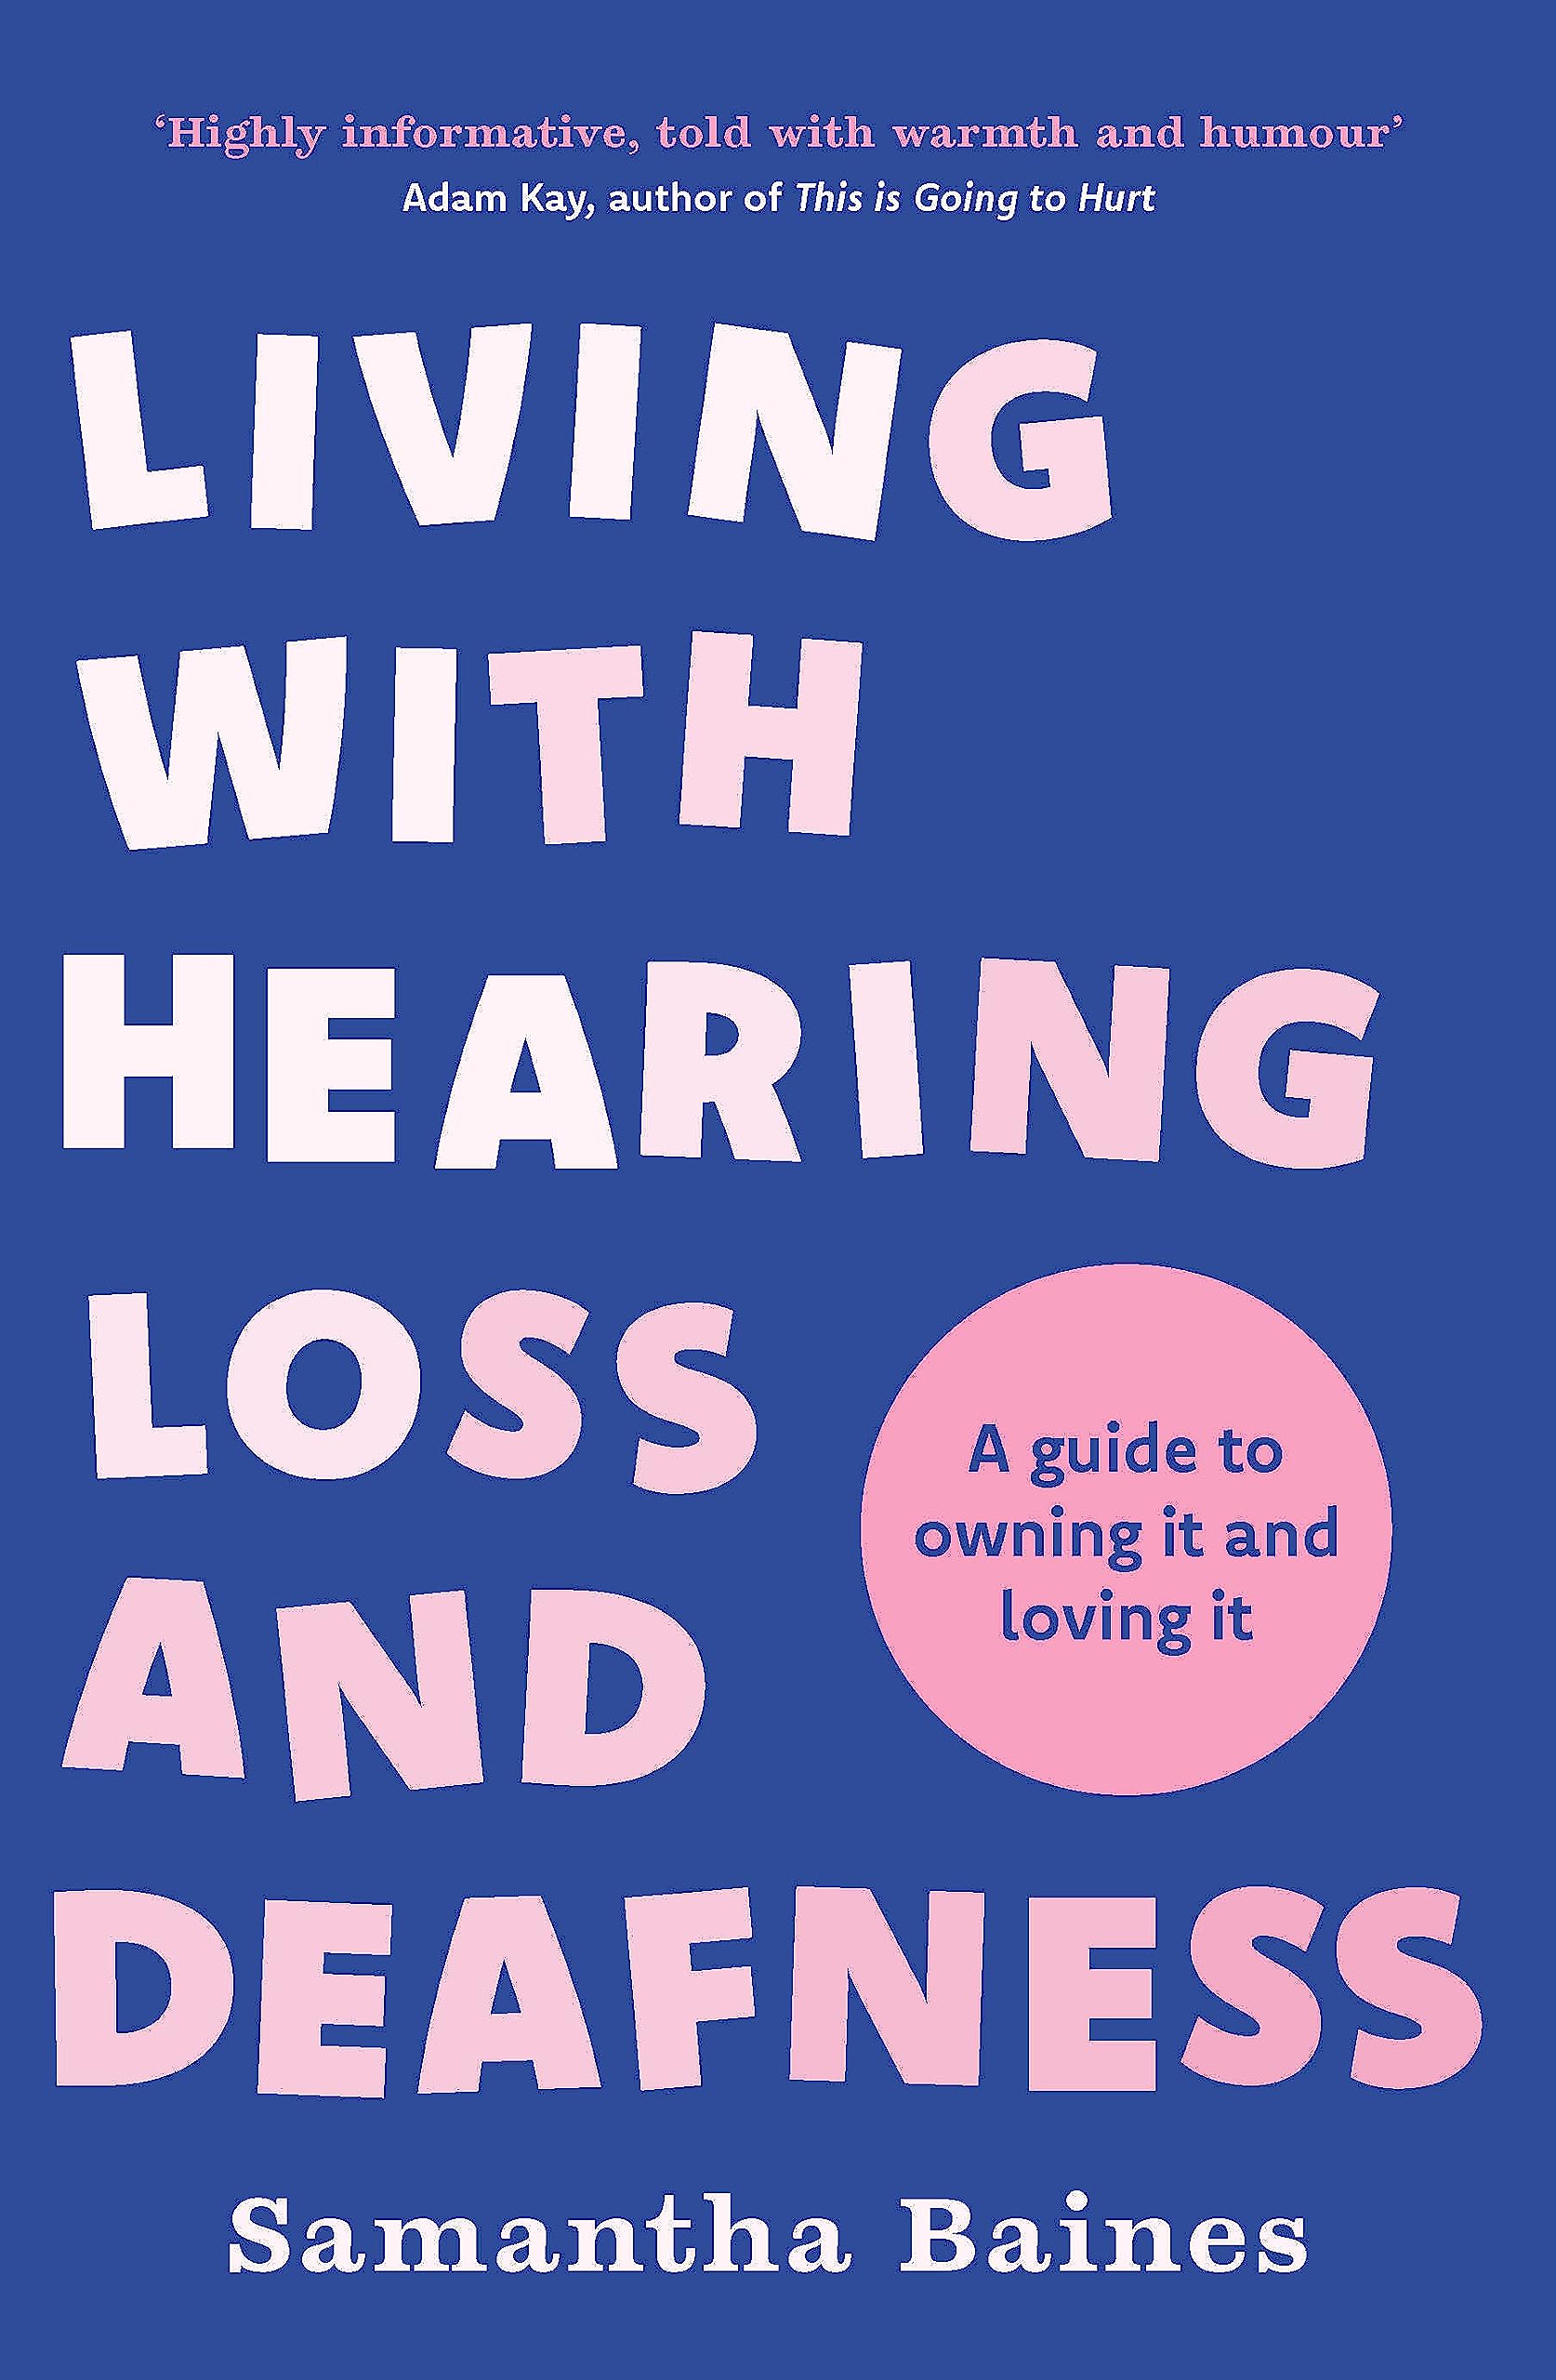 Cover to the book "Living With Hearing Loss and Deafness: A guide to owning it and loving it" by Samantha Baines